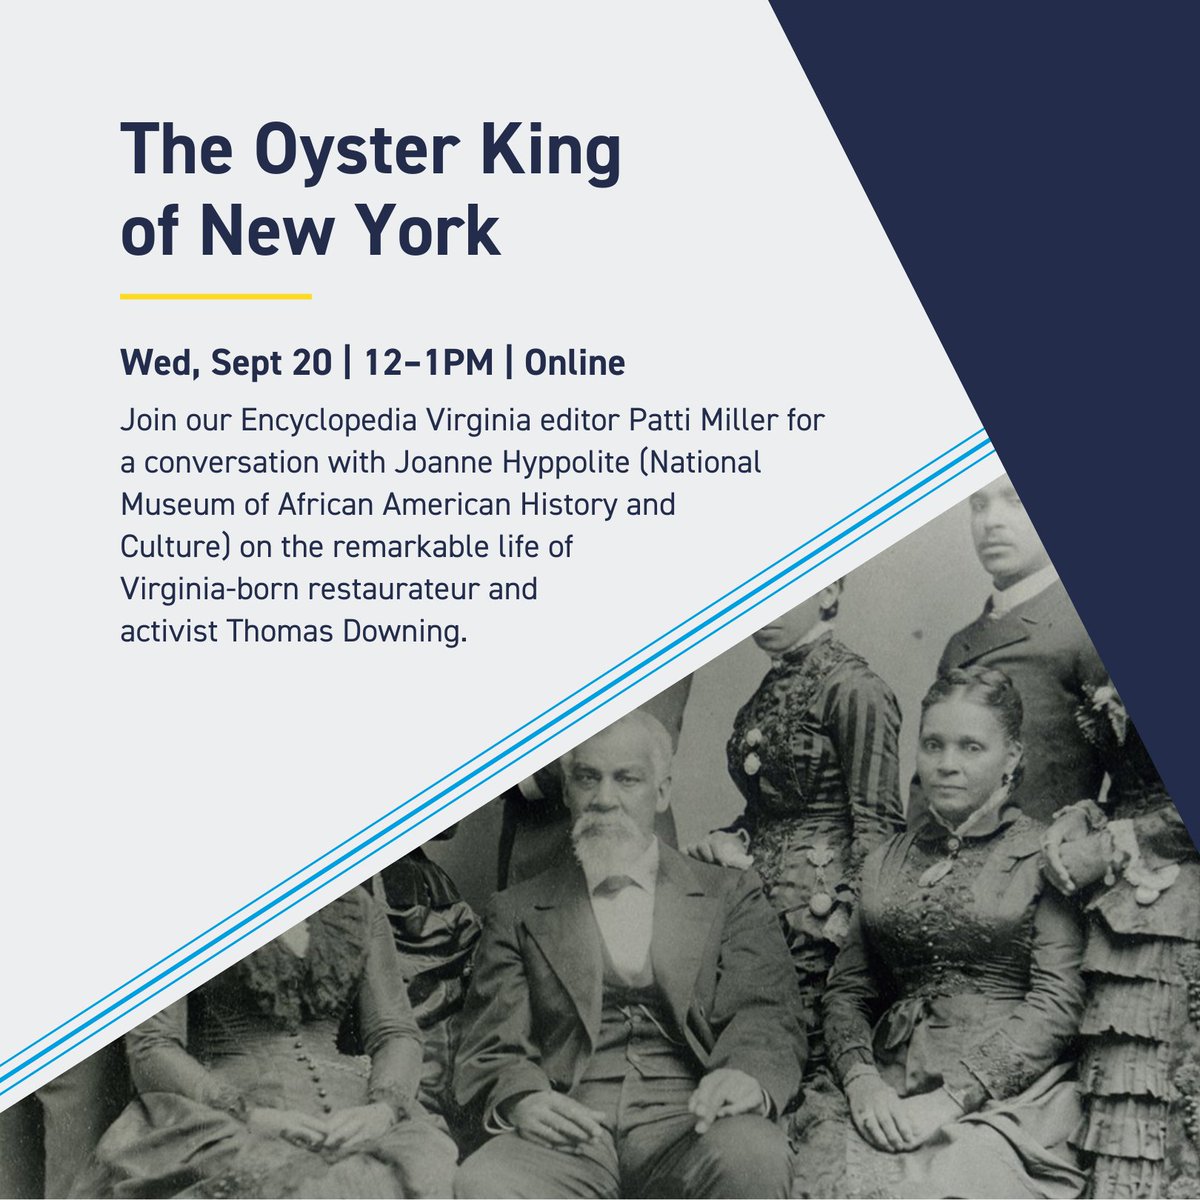 Coming up this month: stop by the Charlottesville Zine Festival, learn more about the Virginia-born “Oyster King of New York,” and craft a slipcase for your favorite book! Browse all upcoming events: loom.ly/AF5xC3w